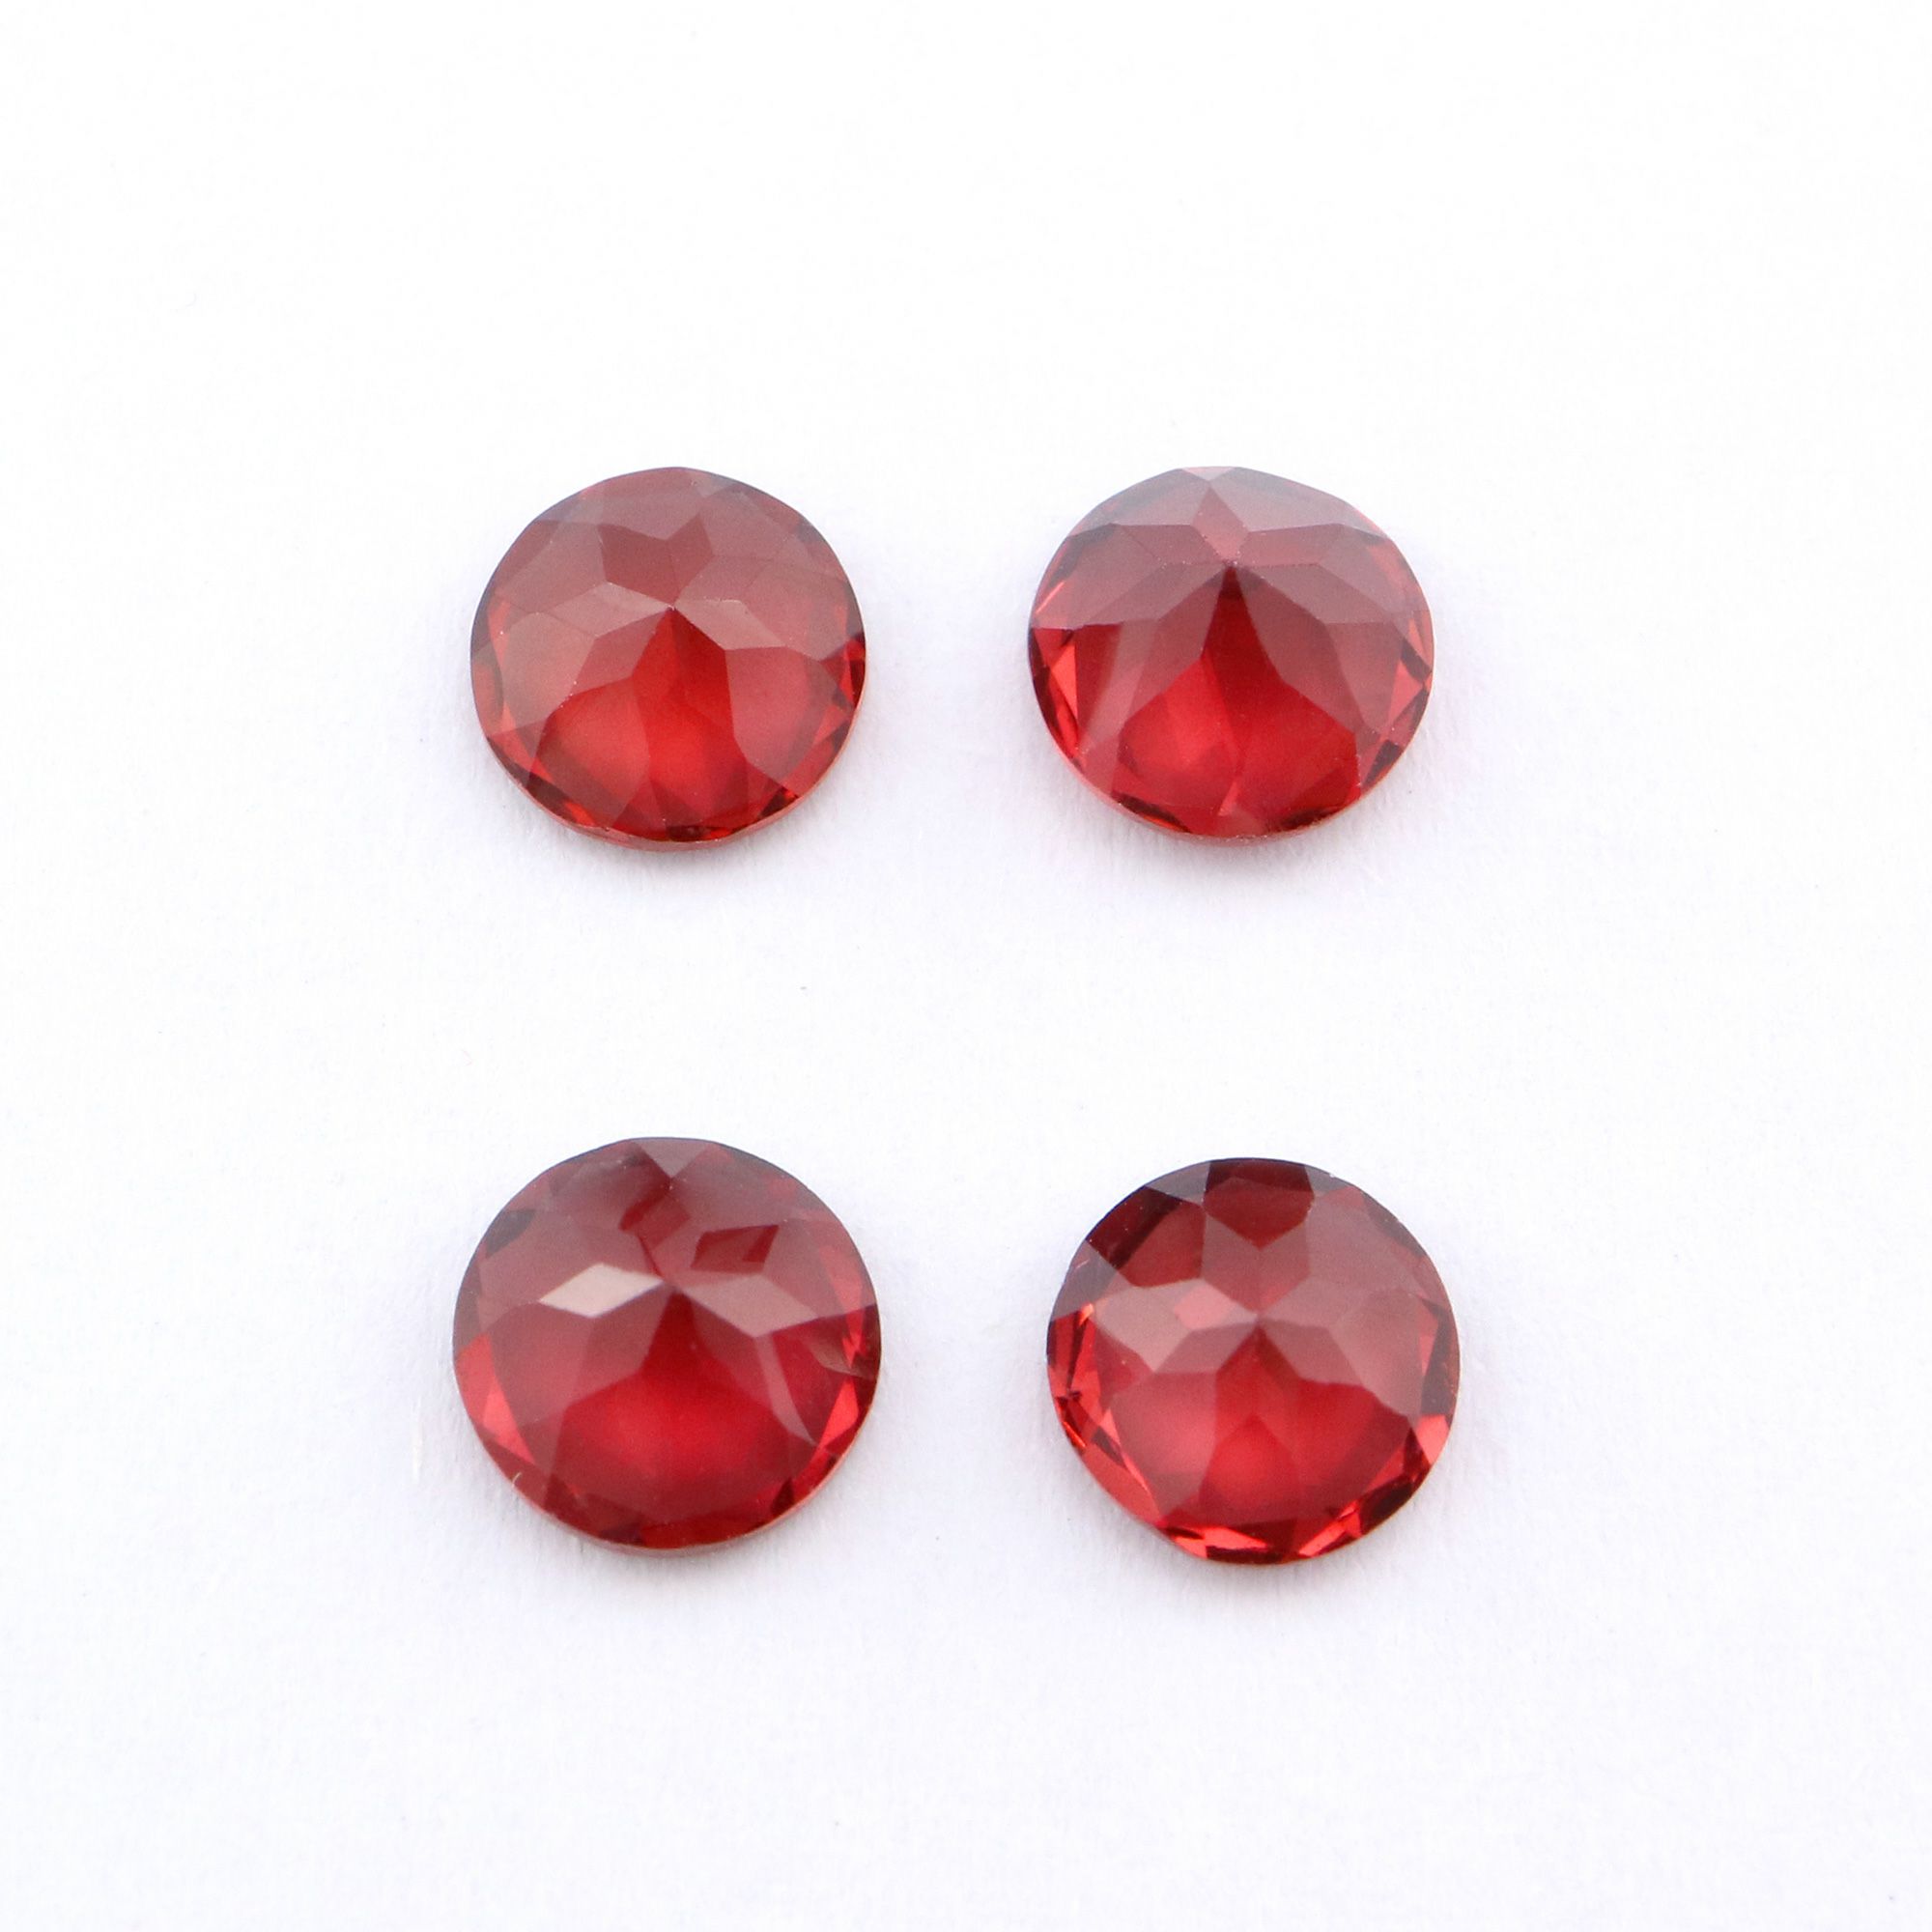 1Pcs Round Red Garnet January Birthstone Faceted Cut Loose Gemstone Nature Semi Precious Stone DIY Jewelry Supplies 4110168 - Click Image to Close